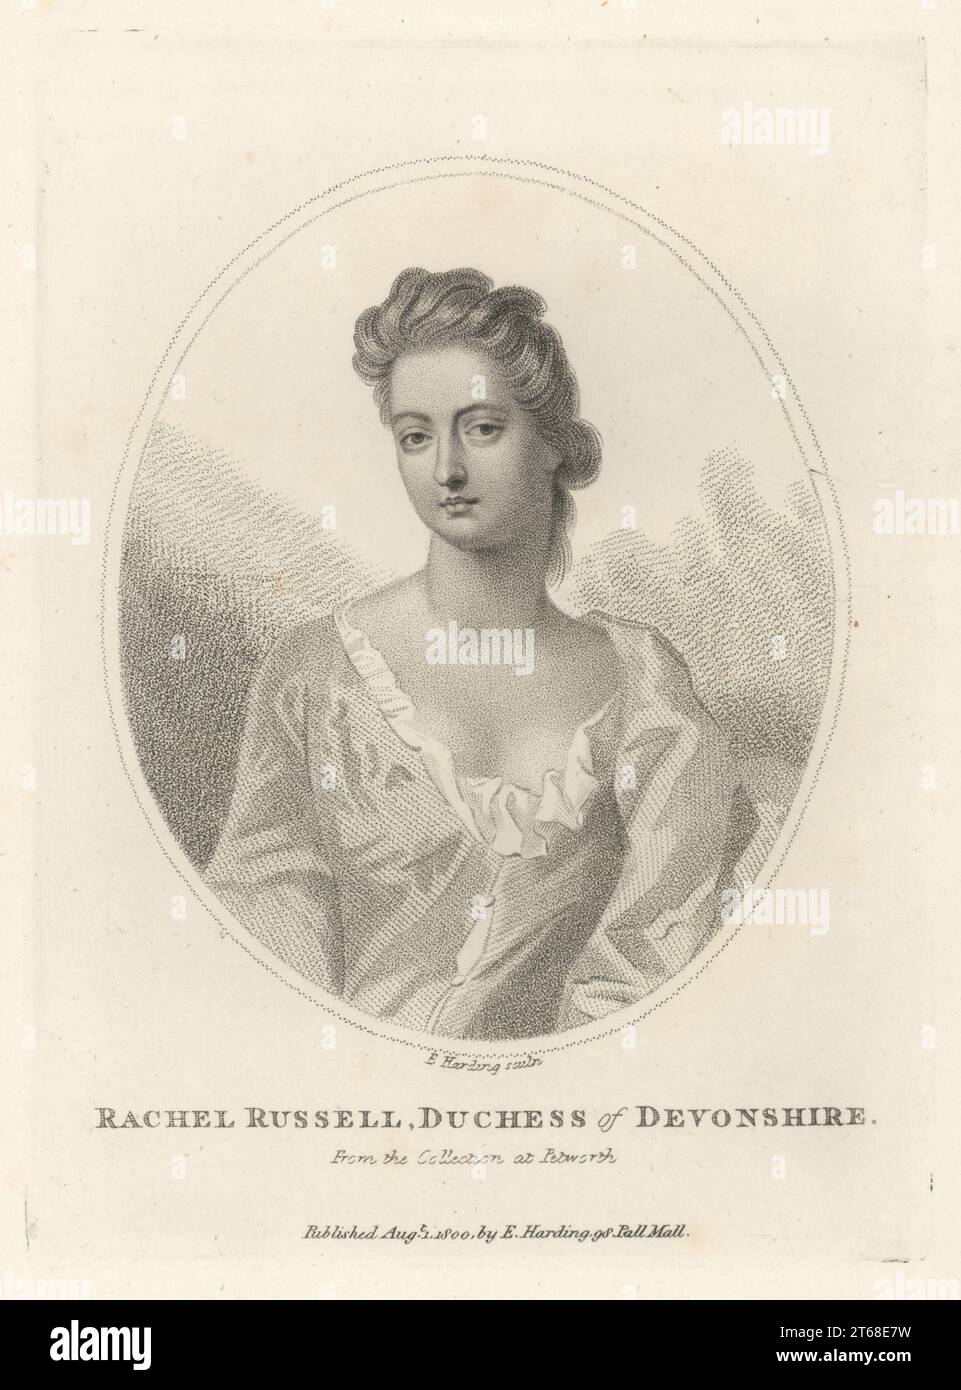 Rachel Russell, Duchess of Devonshire, 1674-1725. Eldest daughter of William Russell, Lord Russell, and Lady Rachel Wriothesley, cousin of Petworths owner, Lady Elizabeth Percy. One of the Petworth Beauties in the collection at Petworth House, West Sussex. Copperplate engraving by Edward Harding after Michael Dahl from John Adolphus The British Cabinet, containing Portraits of Illustrious Personages, printed by T. Bensley for E. Harding, 98 Pall Mall, London, 1800. Stock Photo